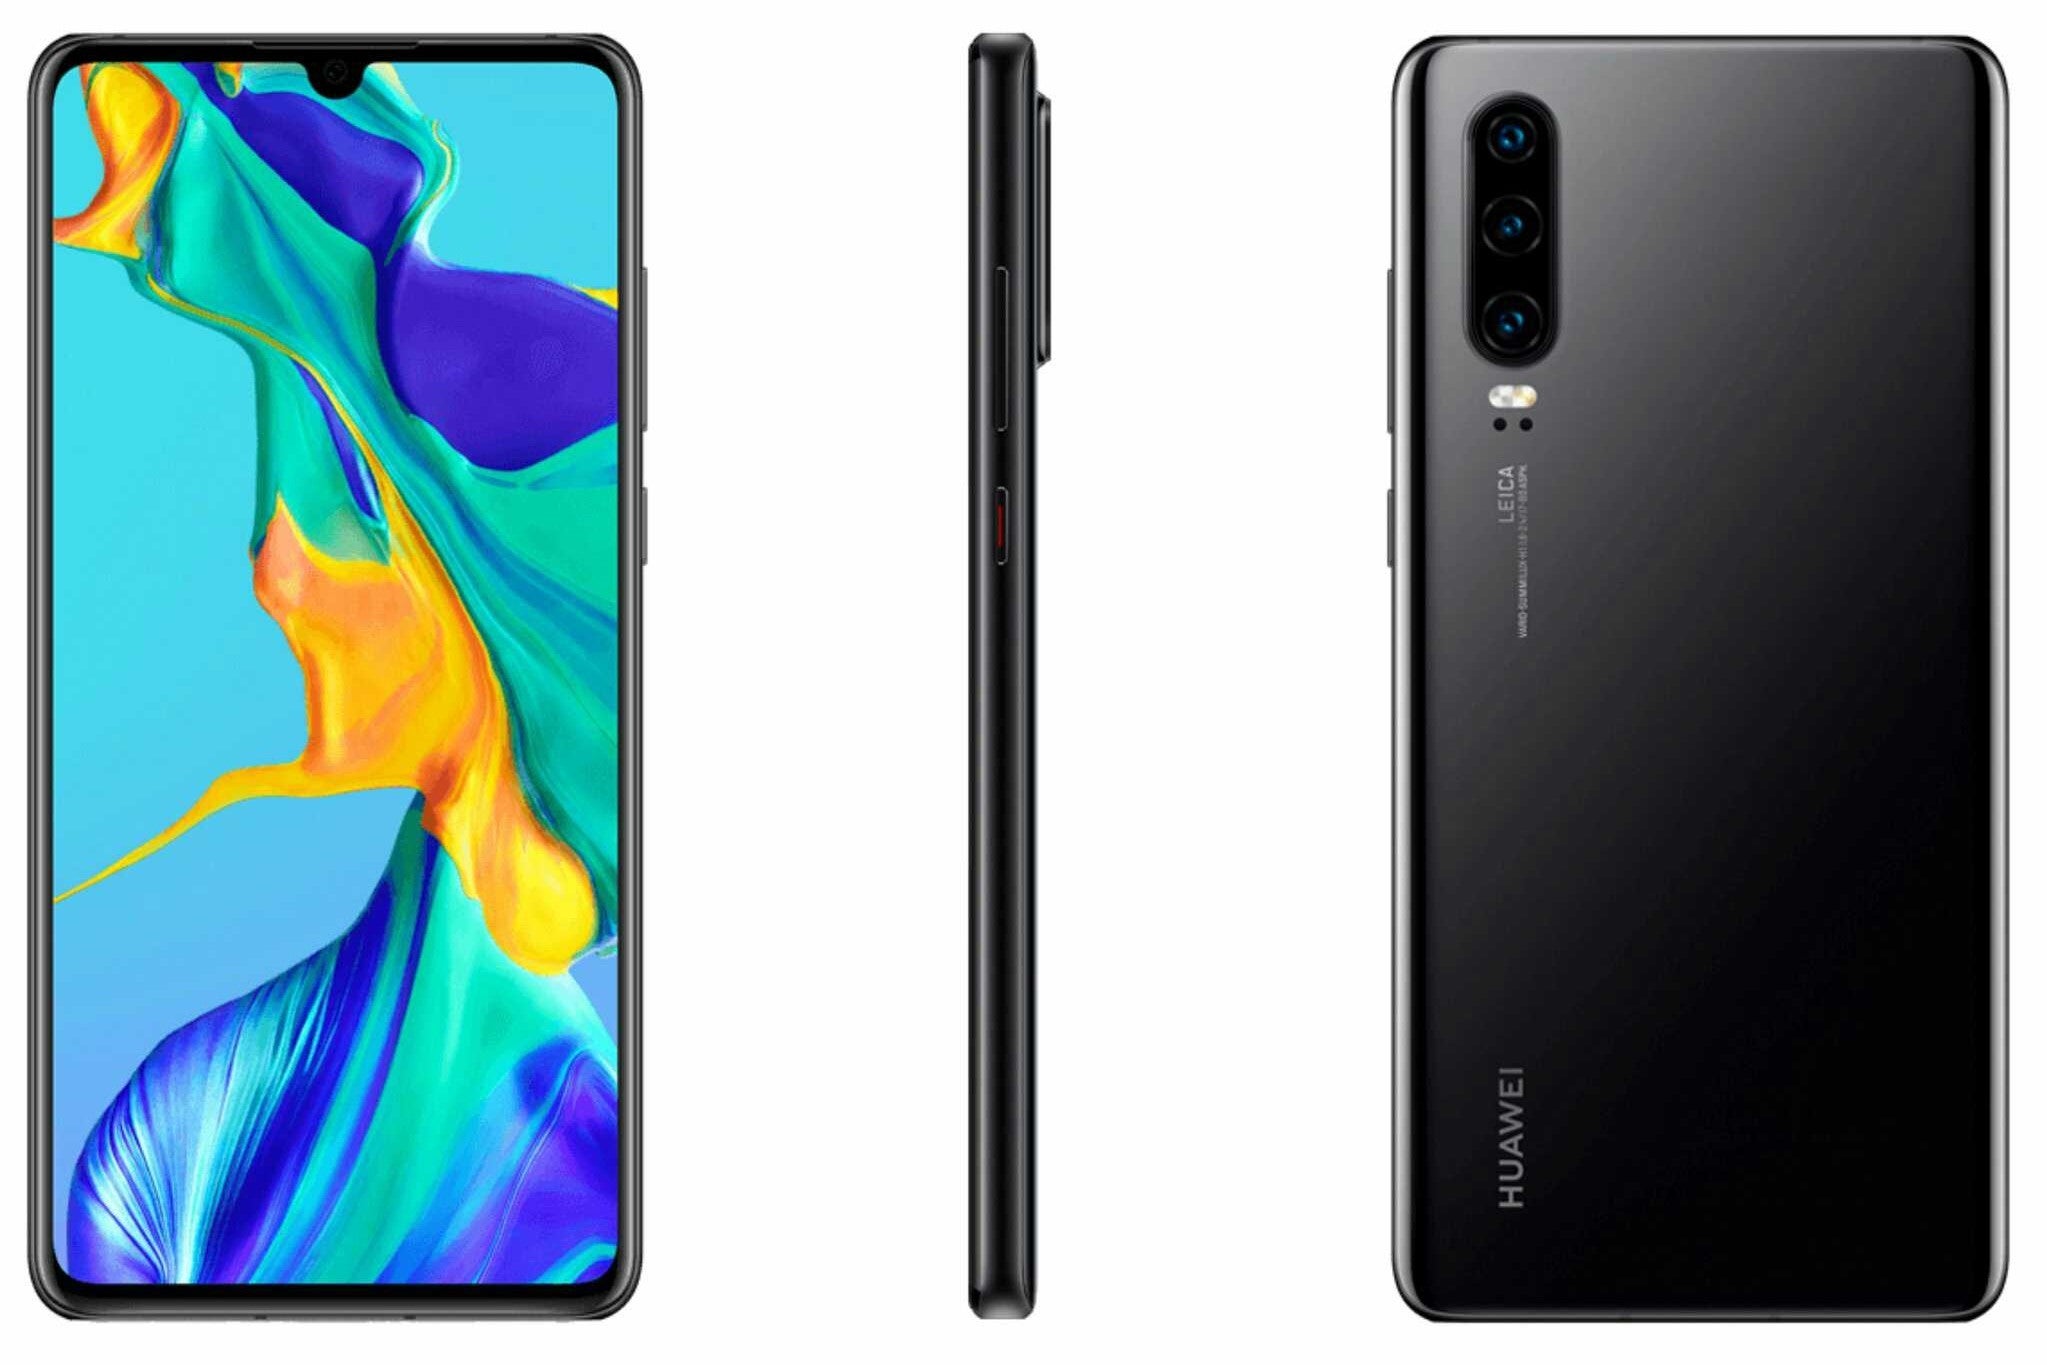 Huawei P30 leaked renders - Alleged Huawei P30, P30 Pro, and P30 Lite official prices leak